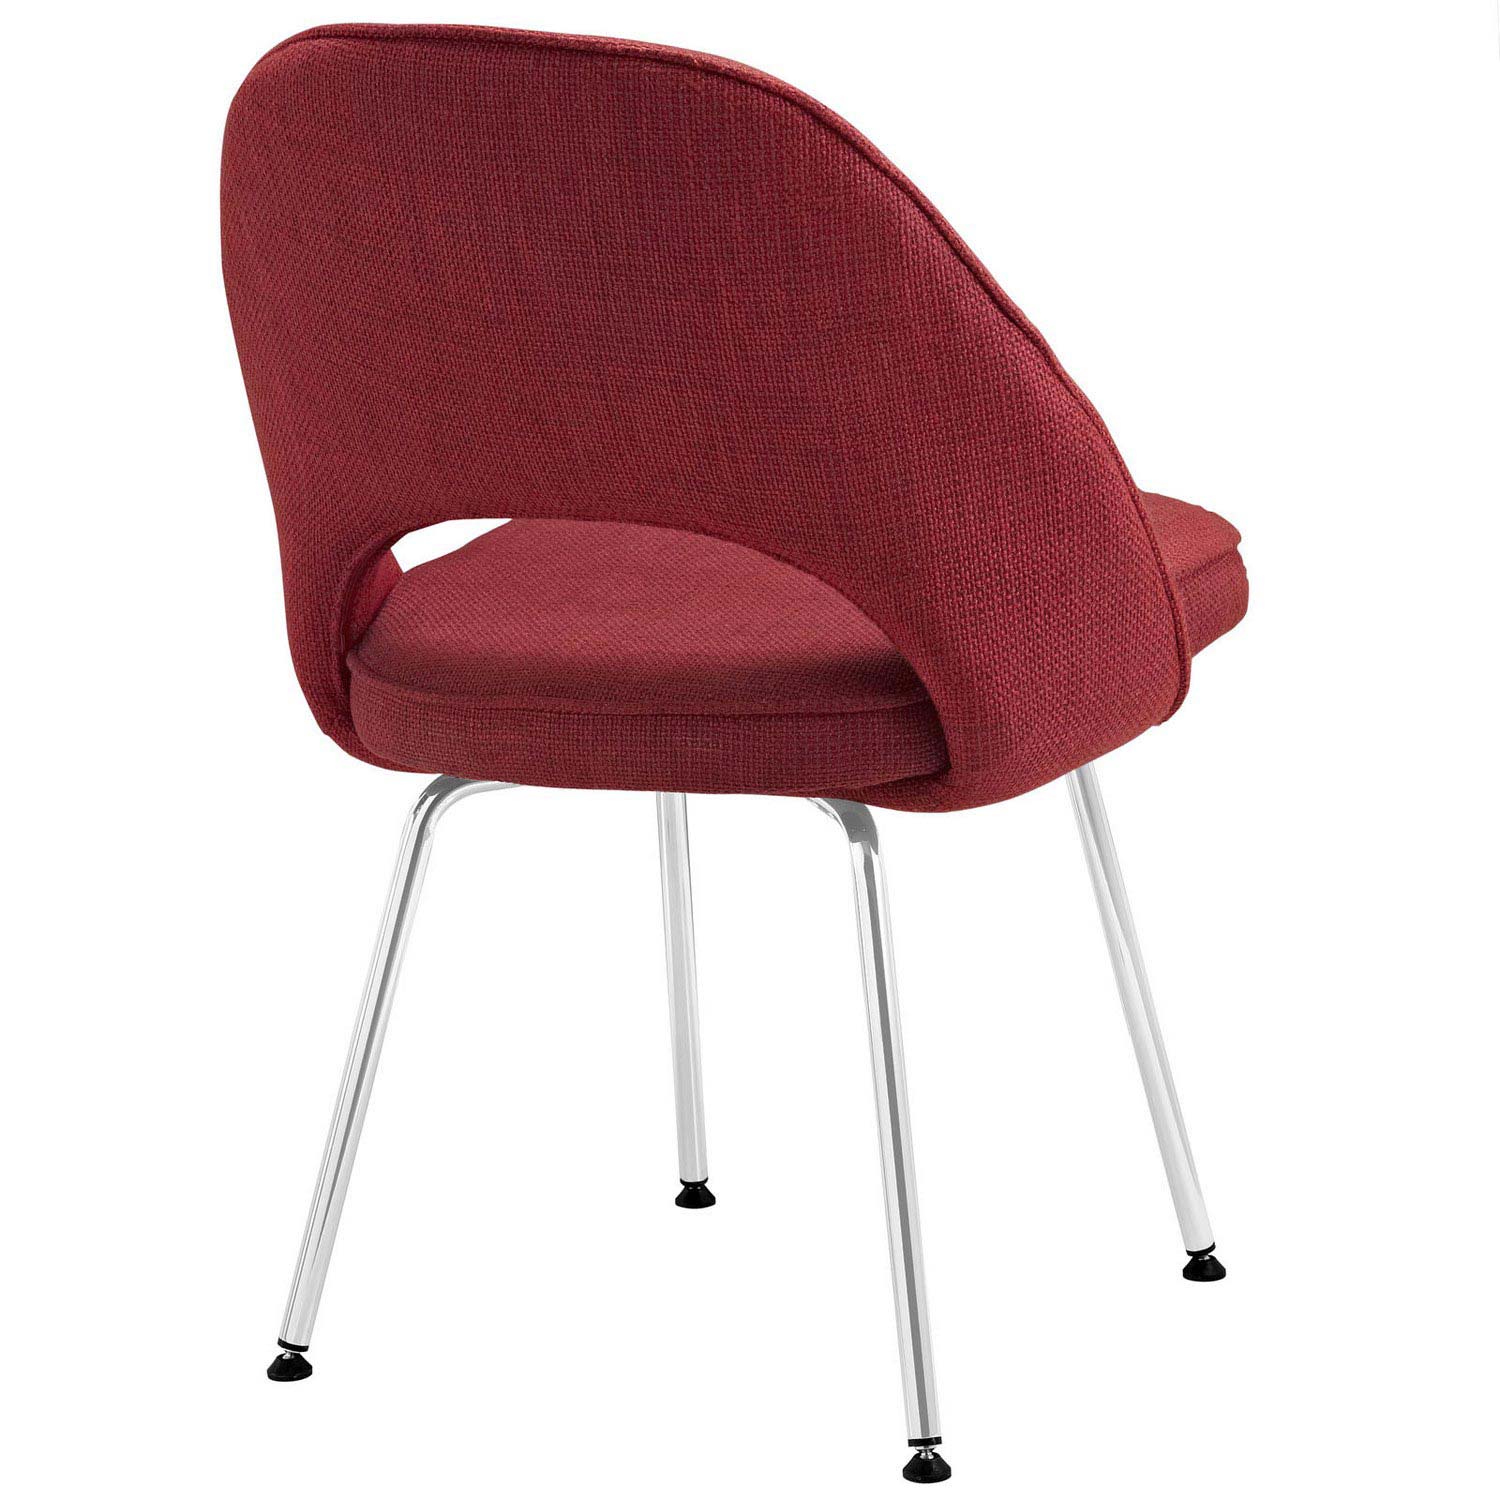 Modway Cordelia Dining Chairs Set of 4 - Red